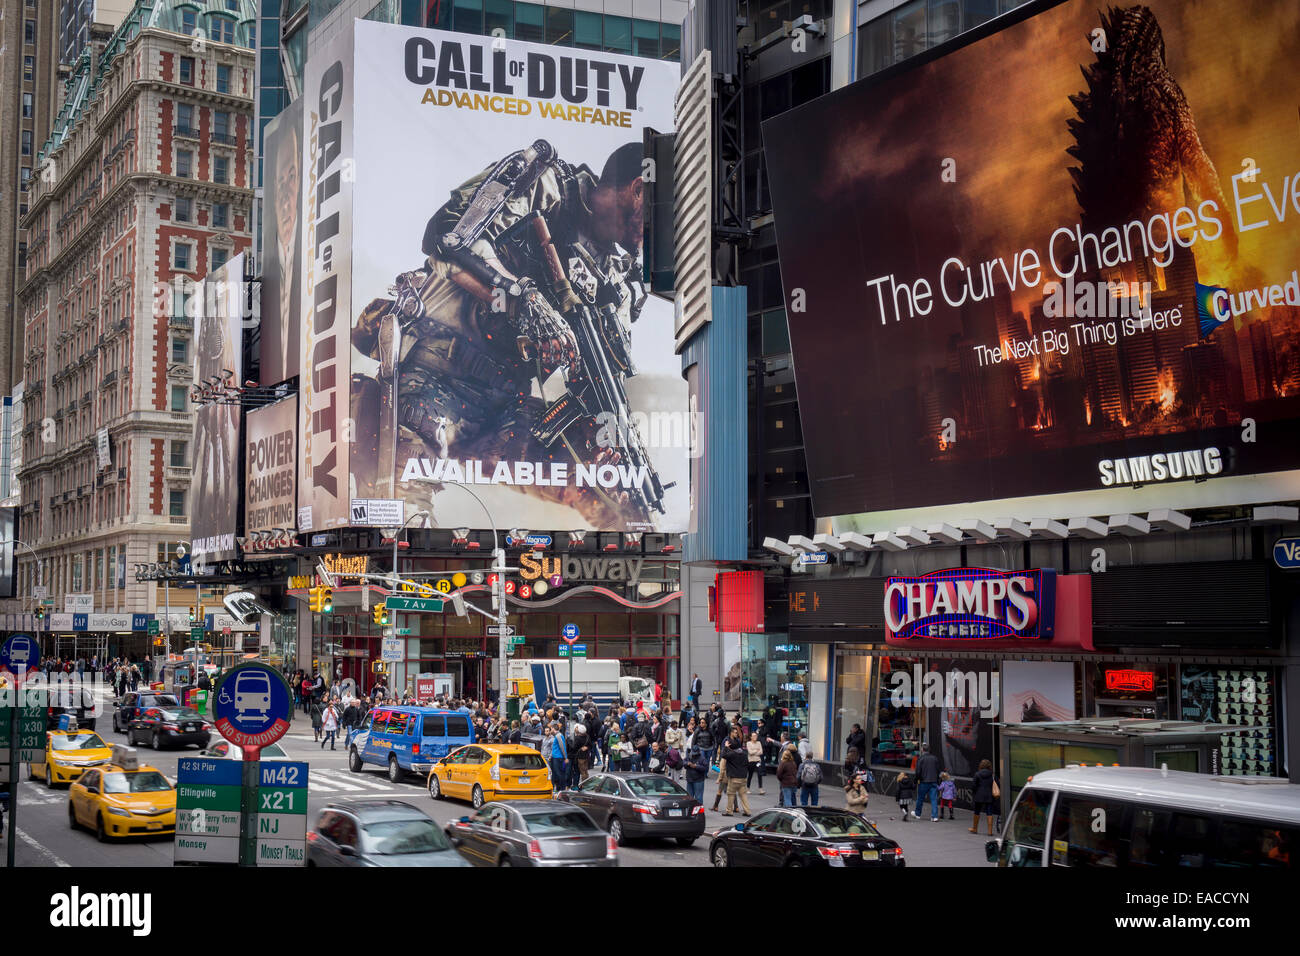 A billboard for the 'Call of Duty: Advanced Warfare'  multiplayer videogame in Times Square in New York Stock Photo